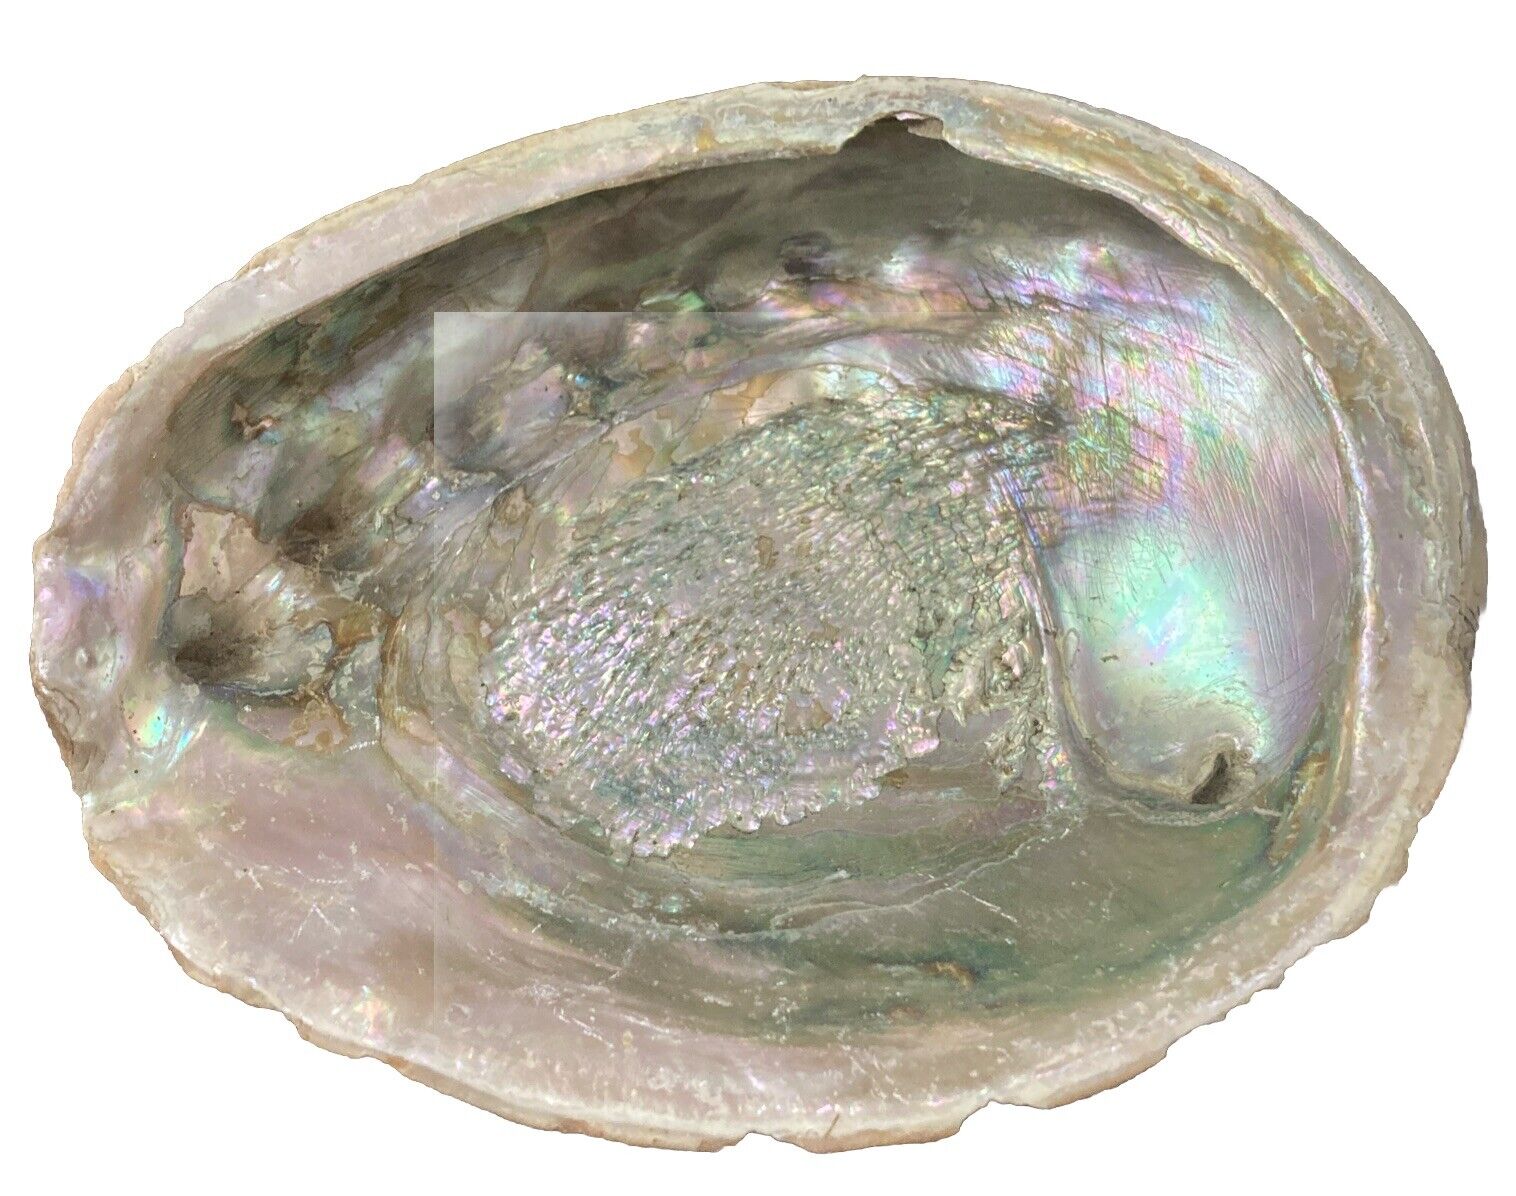 Large Vintage RED Abalone Shell for Crafts Jewlery Art Beach Decor 7” X 8” #4